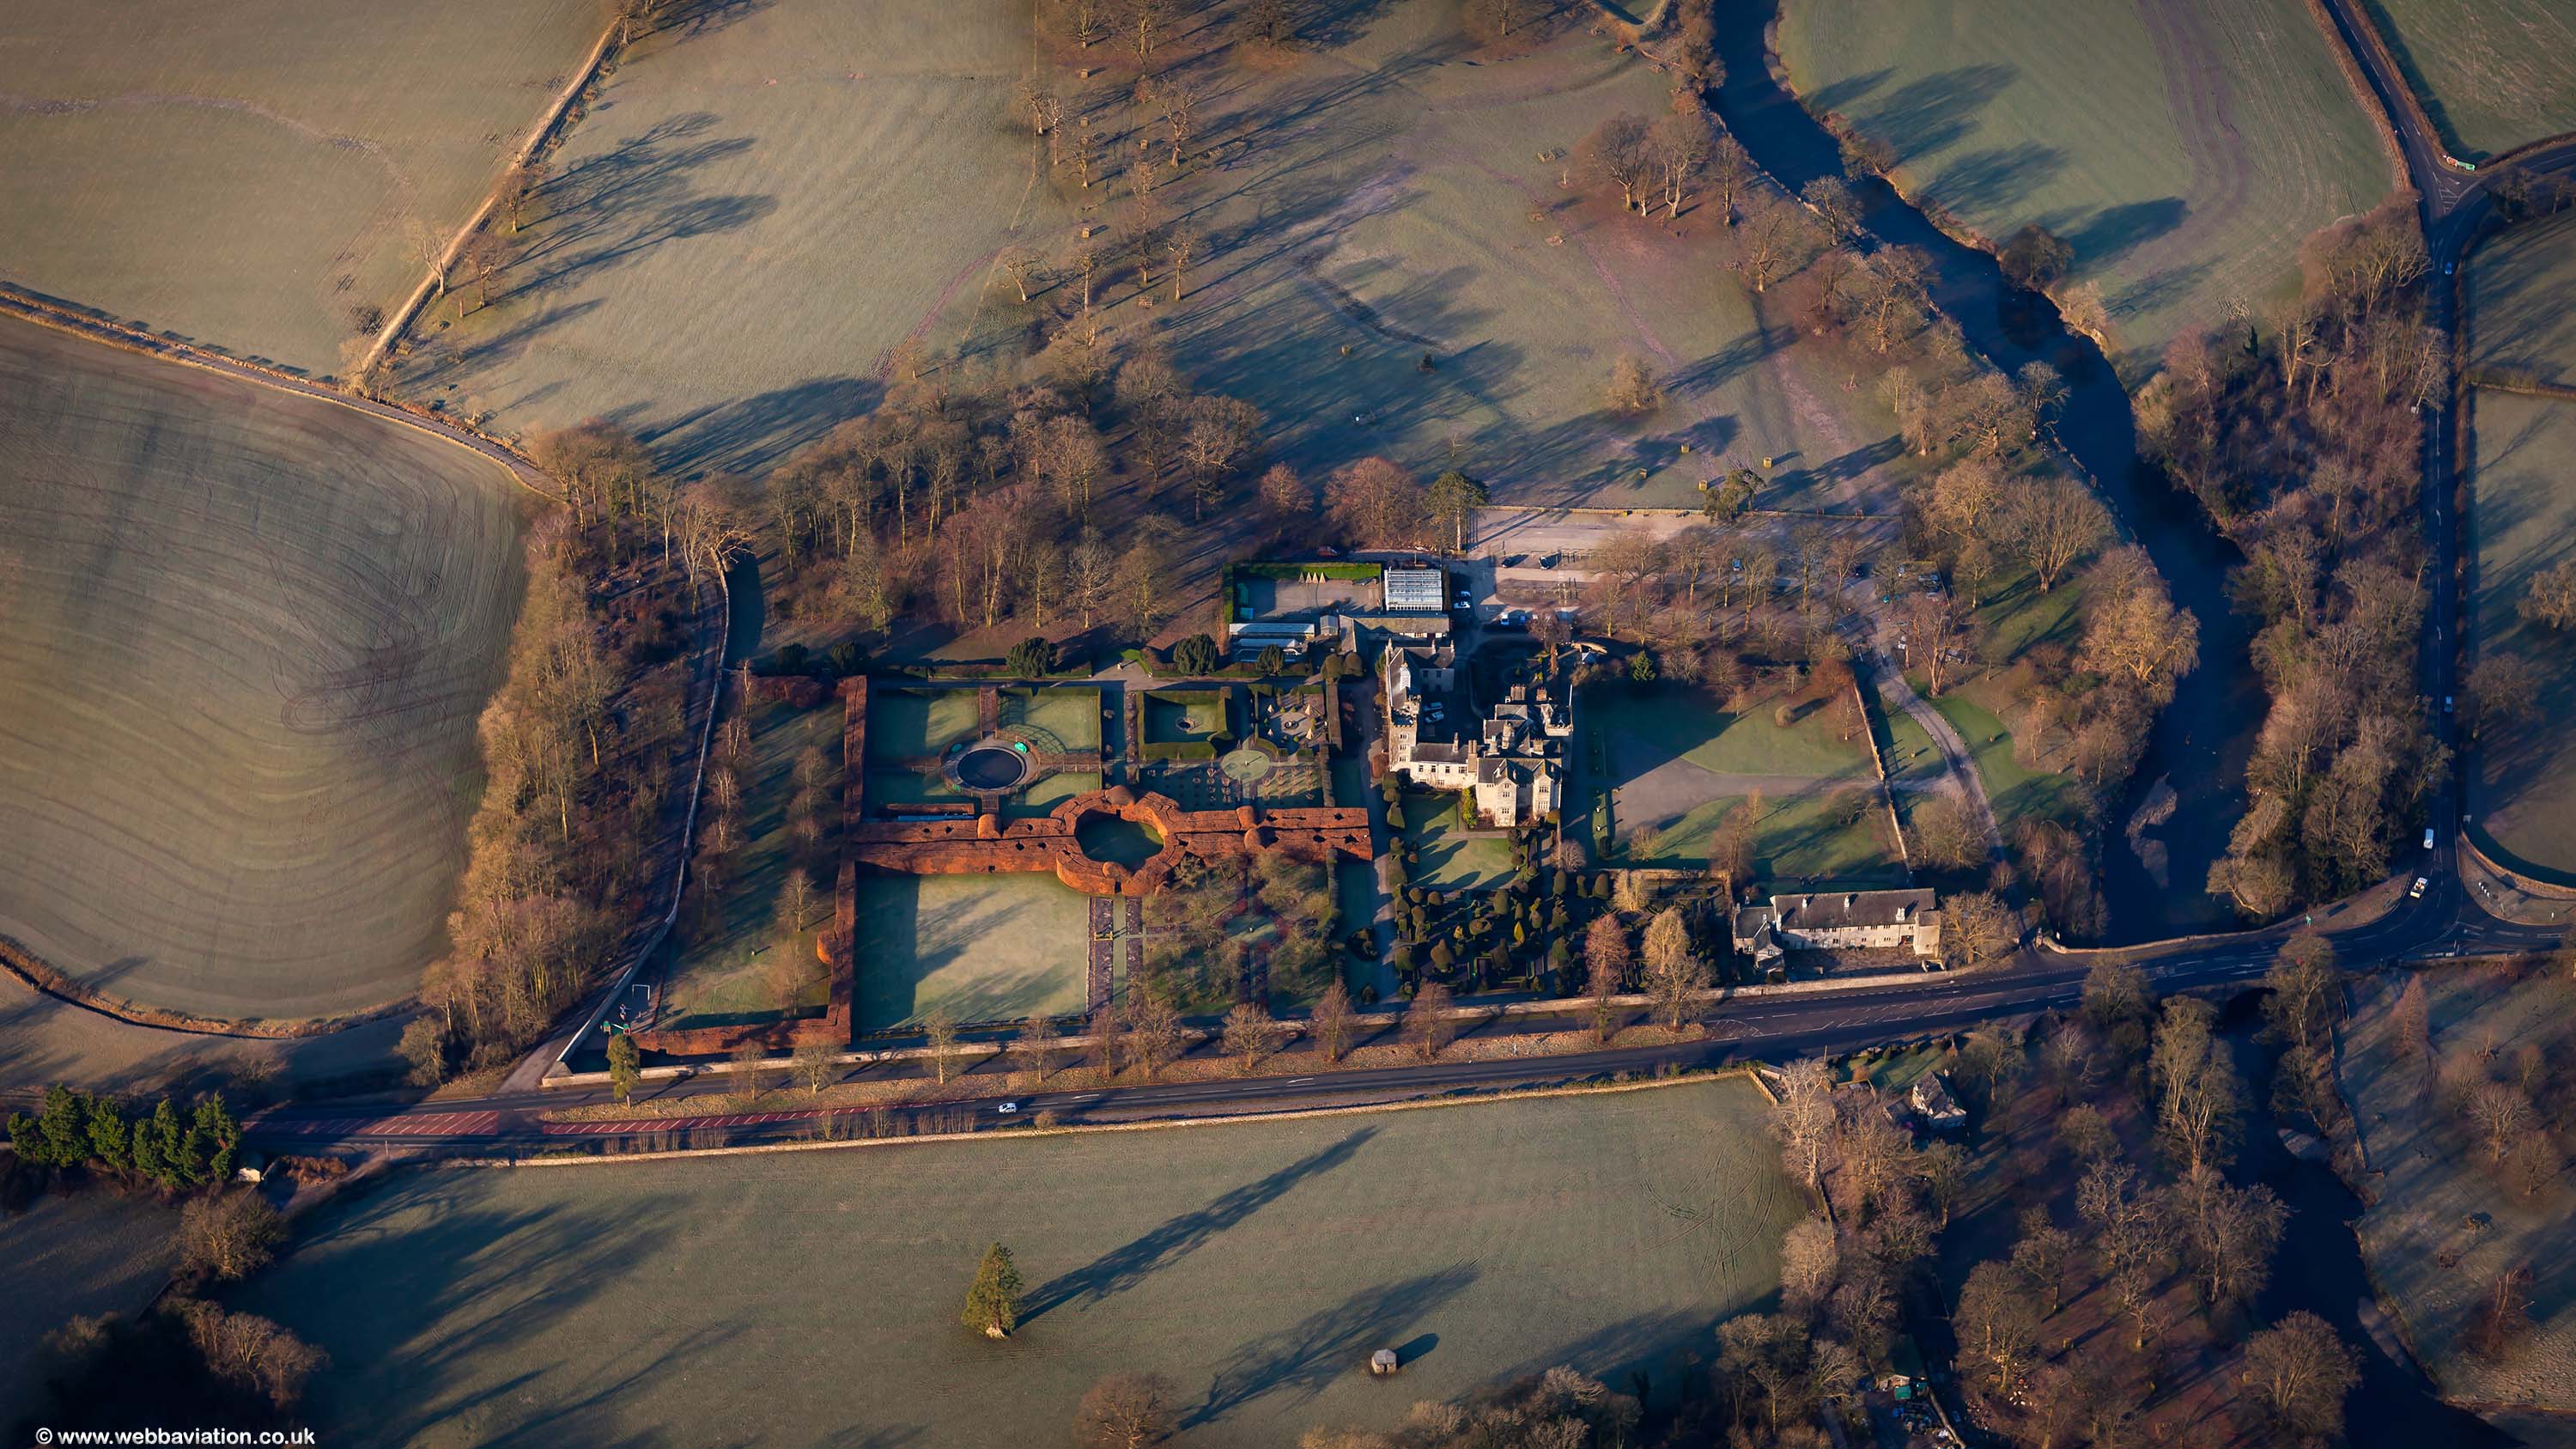  Levens Hall in the Lake District Cumbria UK aerial photograph